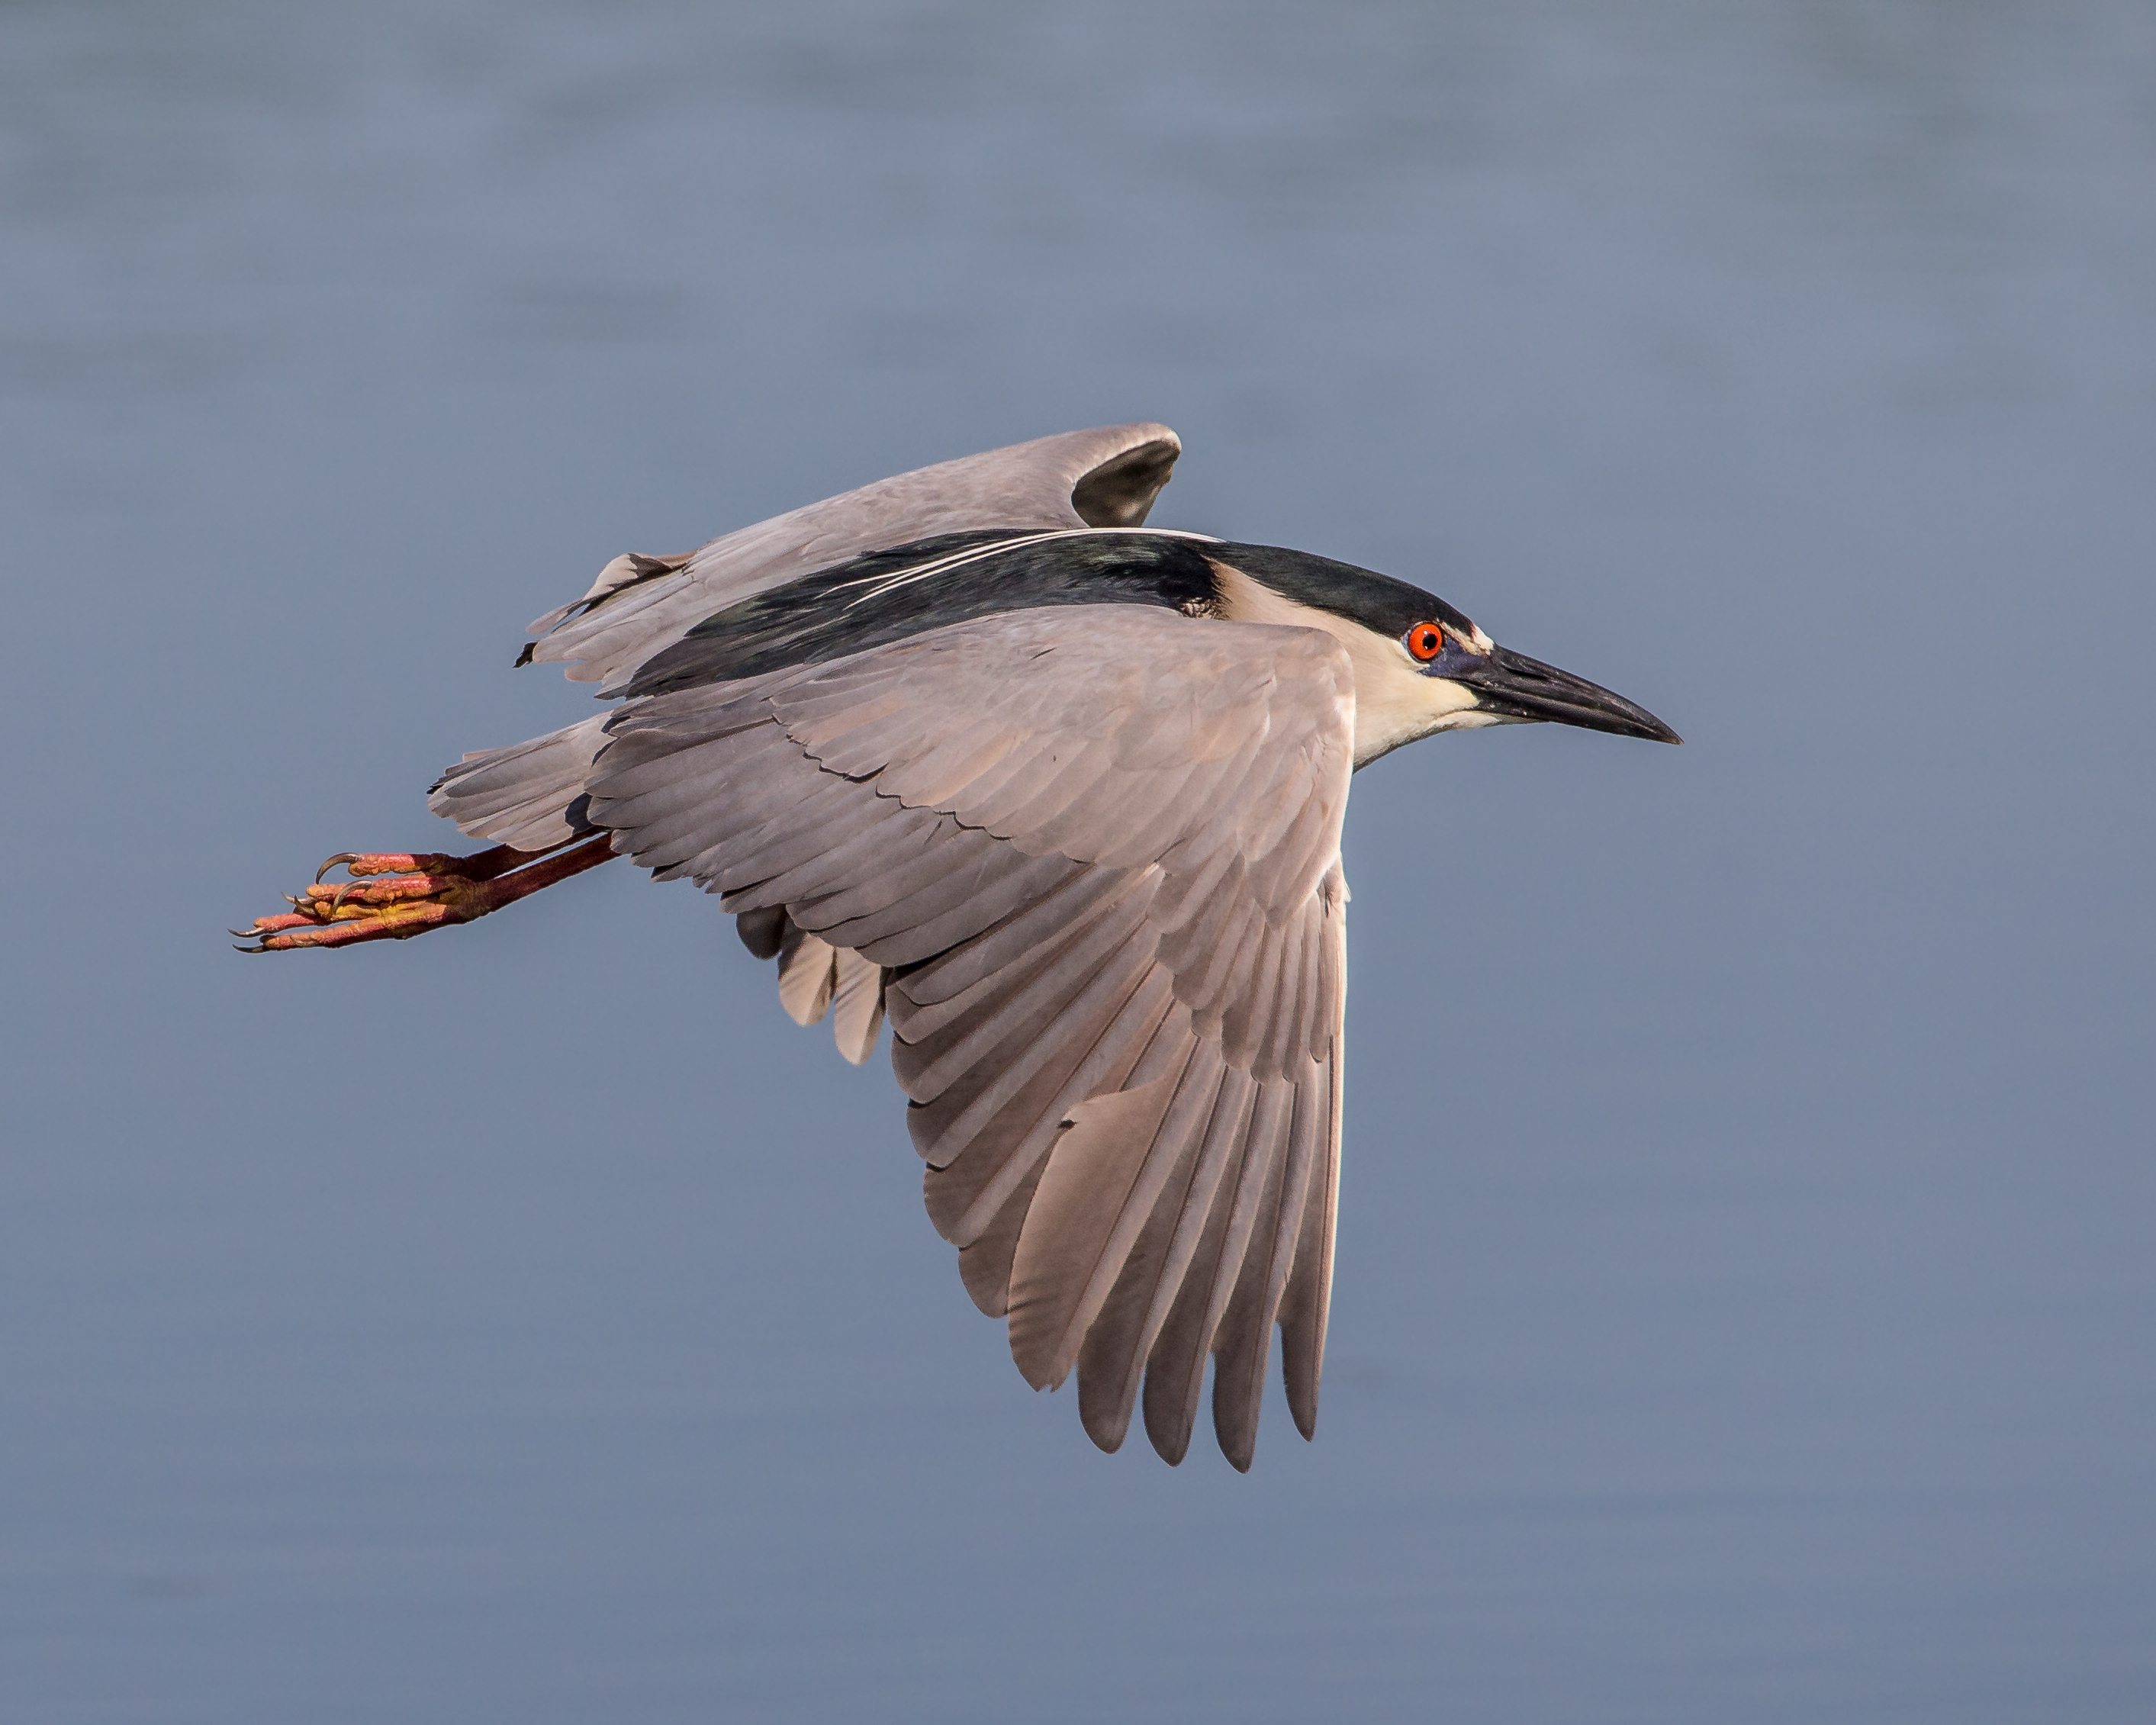 Black-crowned Night-Herons were among the first long-legged waders to return to New York City, and despite declining numbers, remain the most abundant breeding wader in the harbor. <a href="https://www.flickr.com/photos/andymorffew/16430401584" target="_blank" >Photo</a>: Andy Morffew/<a href="https://creativecommons.org/licenses/by-nc/2.0/" target="_blank" >CC BY 2.0</a>